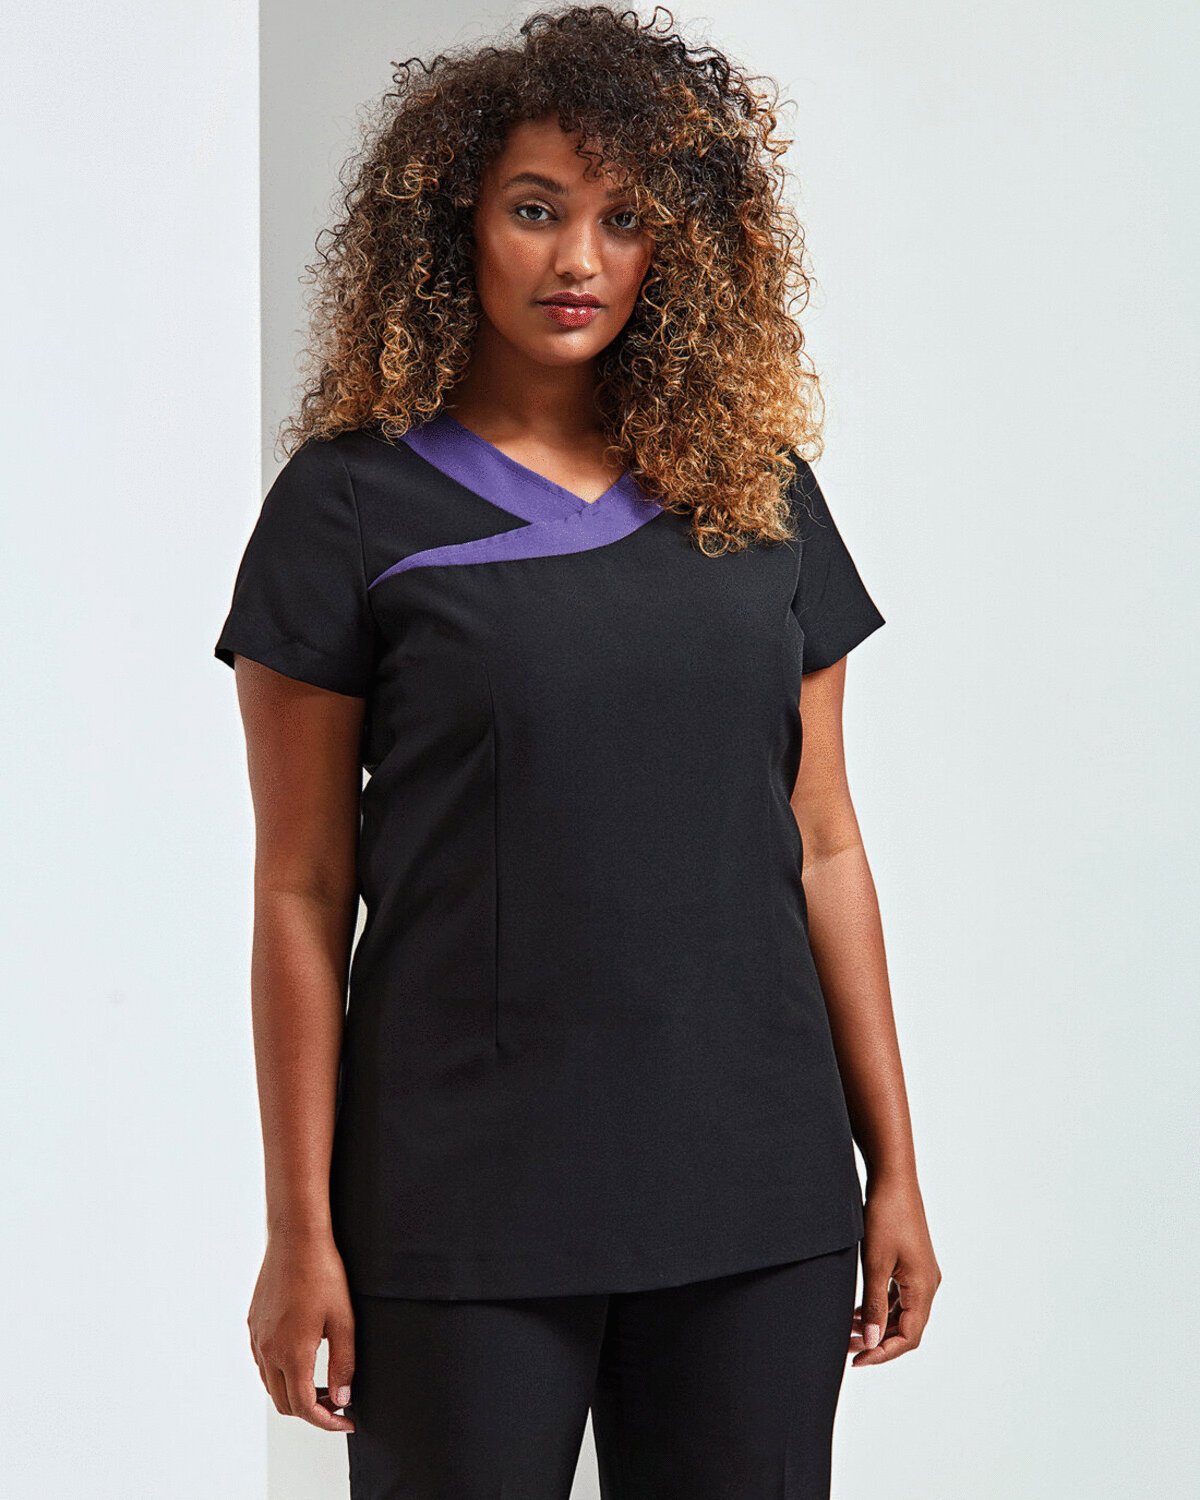 IVY BEAUTY AND SPA TUNIC